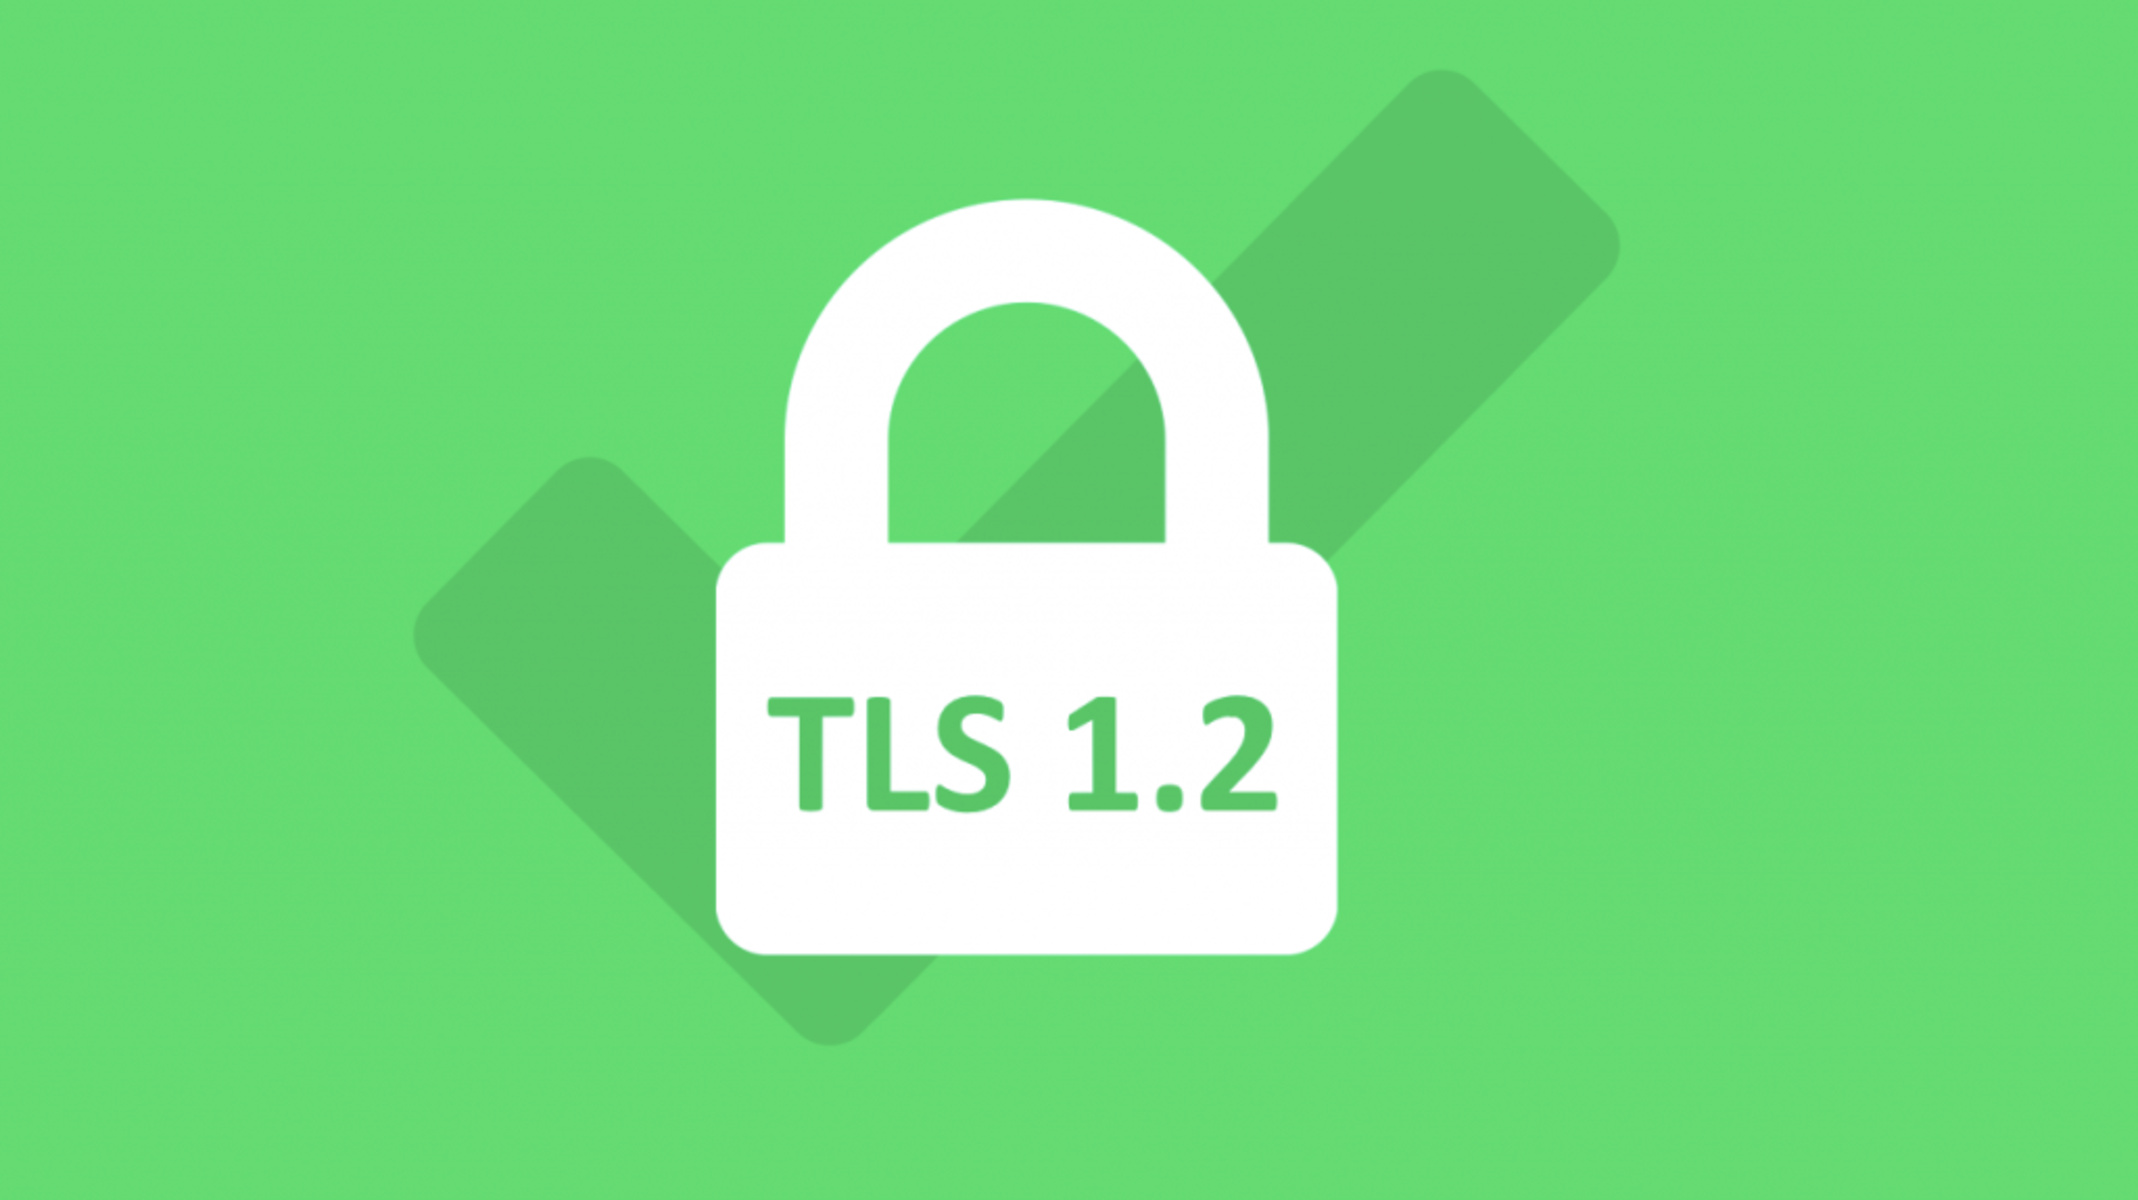 How To Enable Tls 1.2 In Chrome